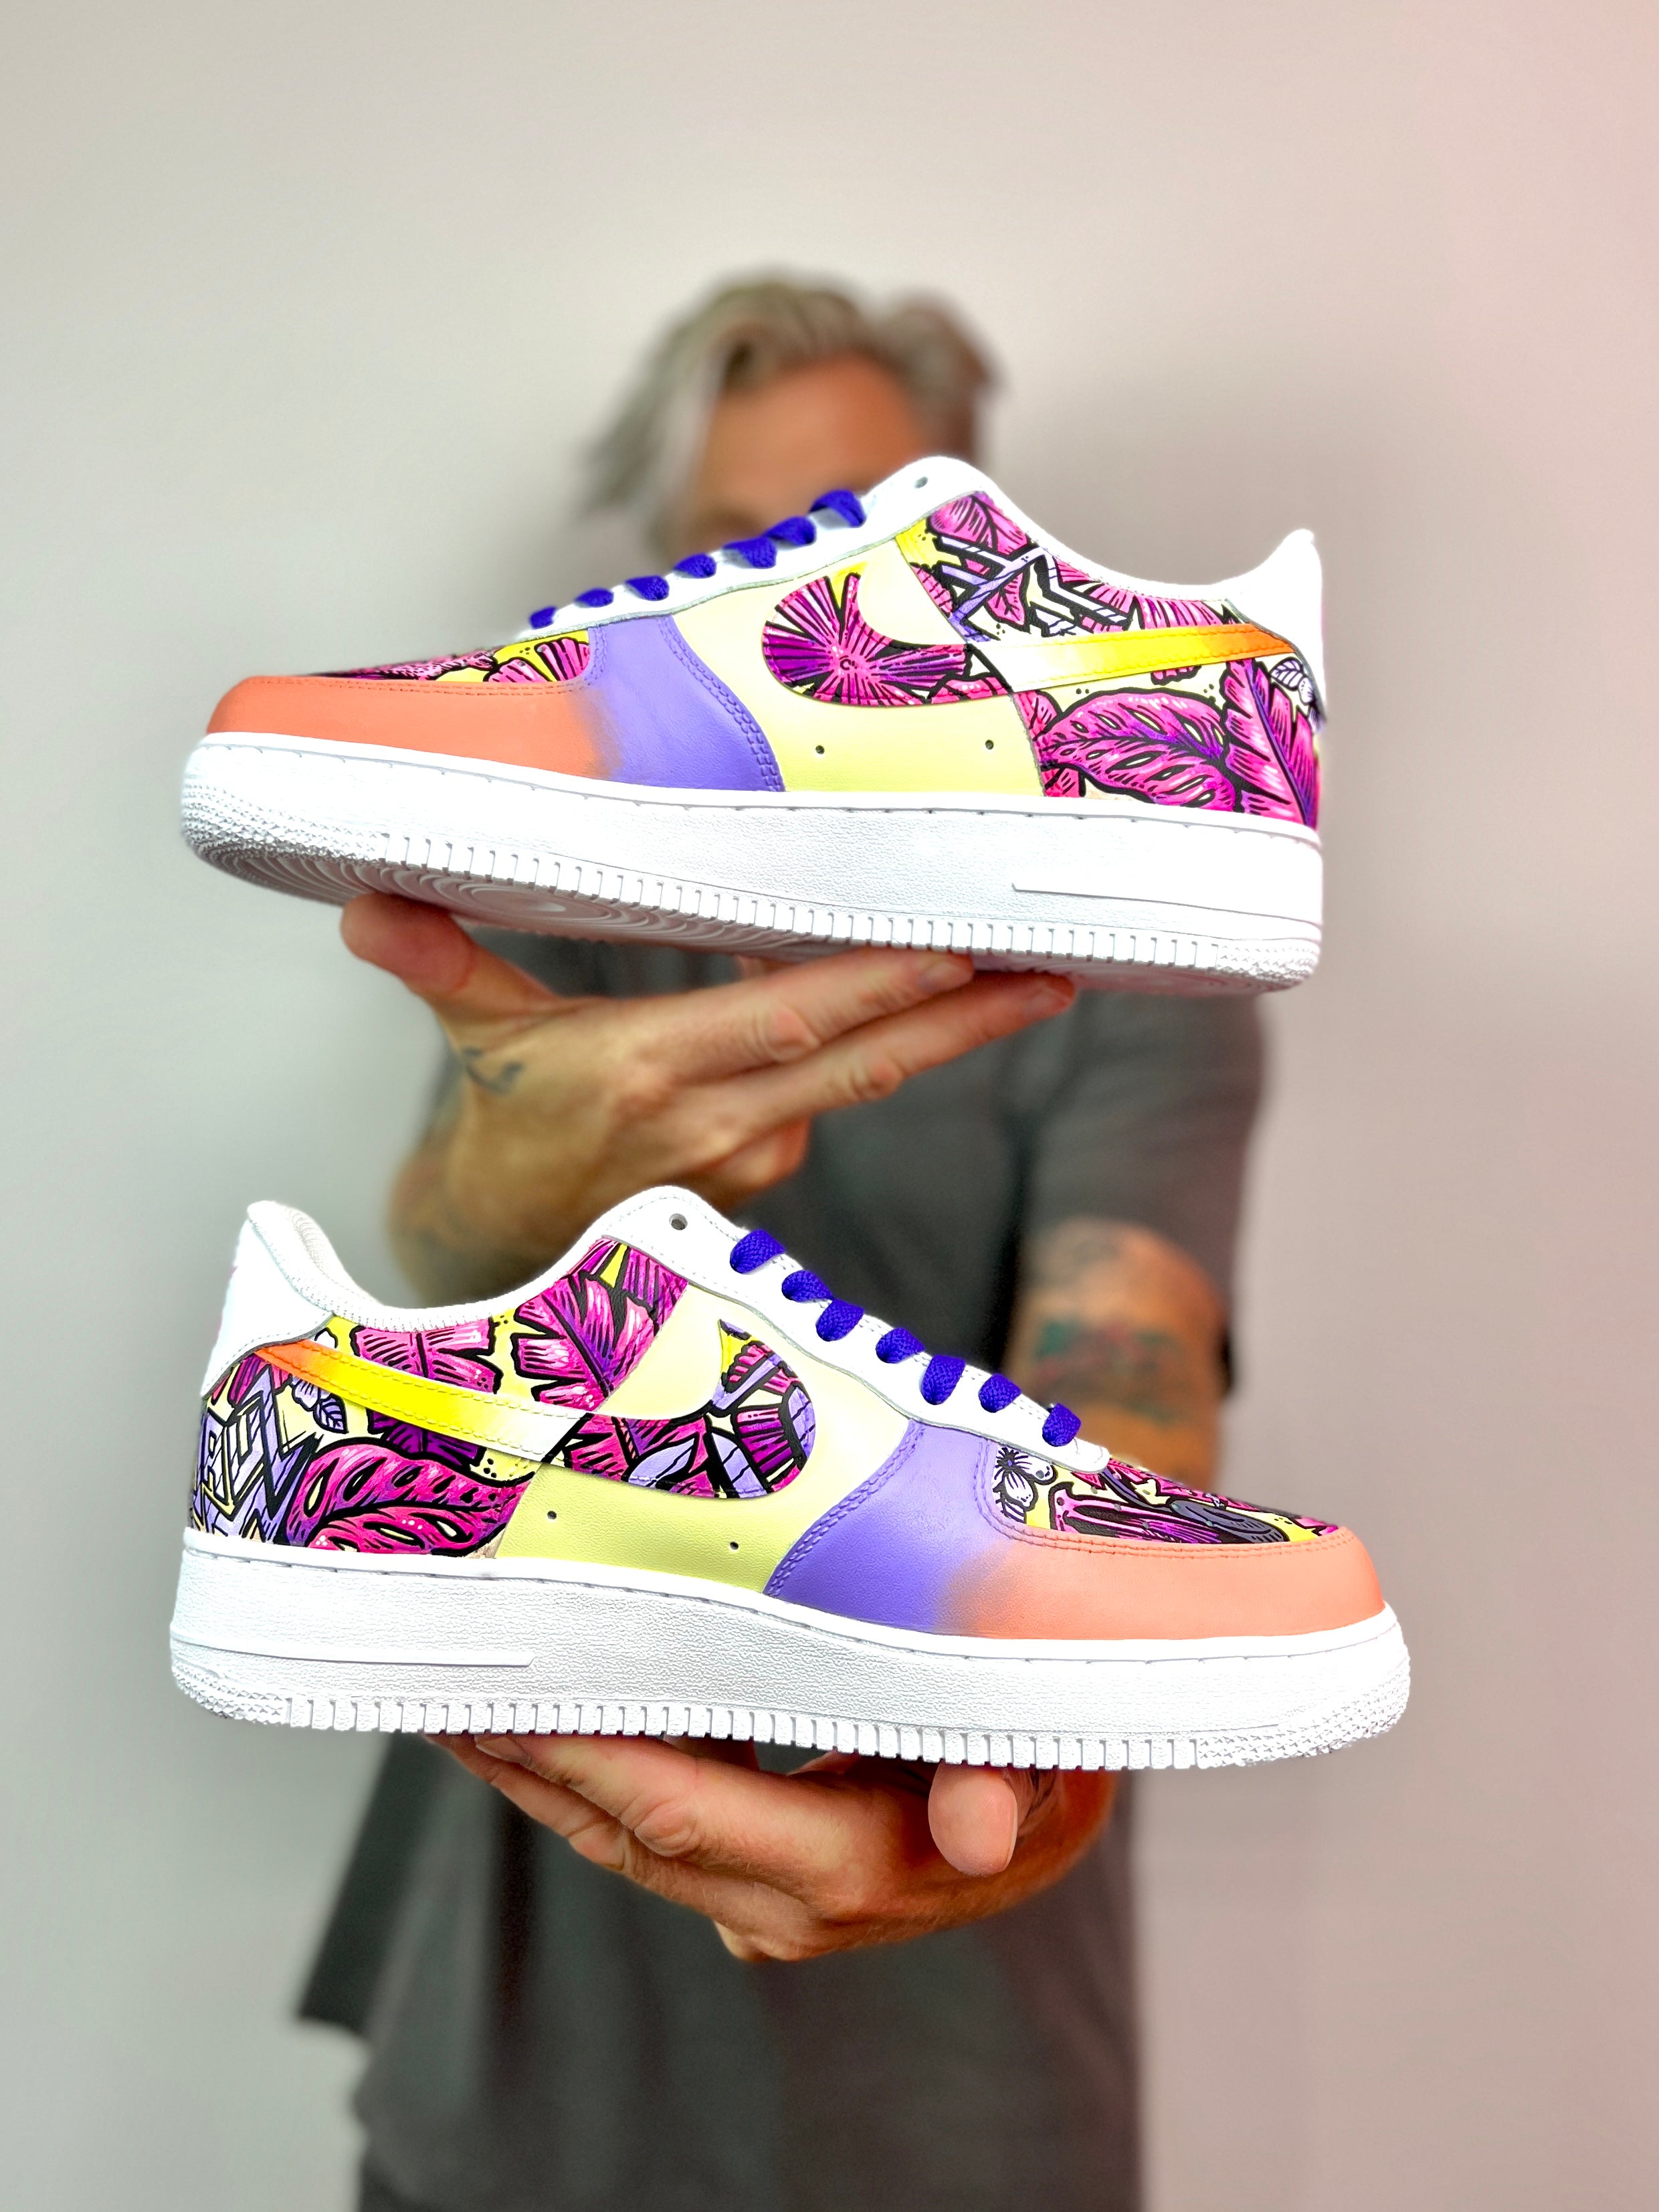 Bacardi X Chasing Summer X Chad Cantcolor - Festival collab Nike AF1 Sneakers